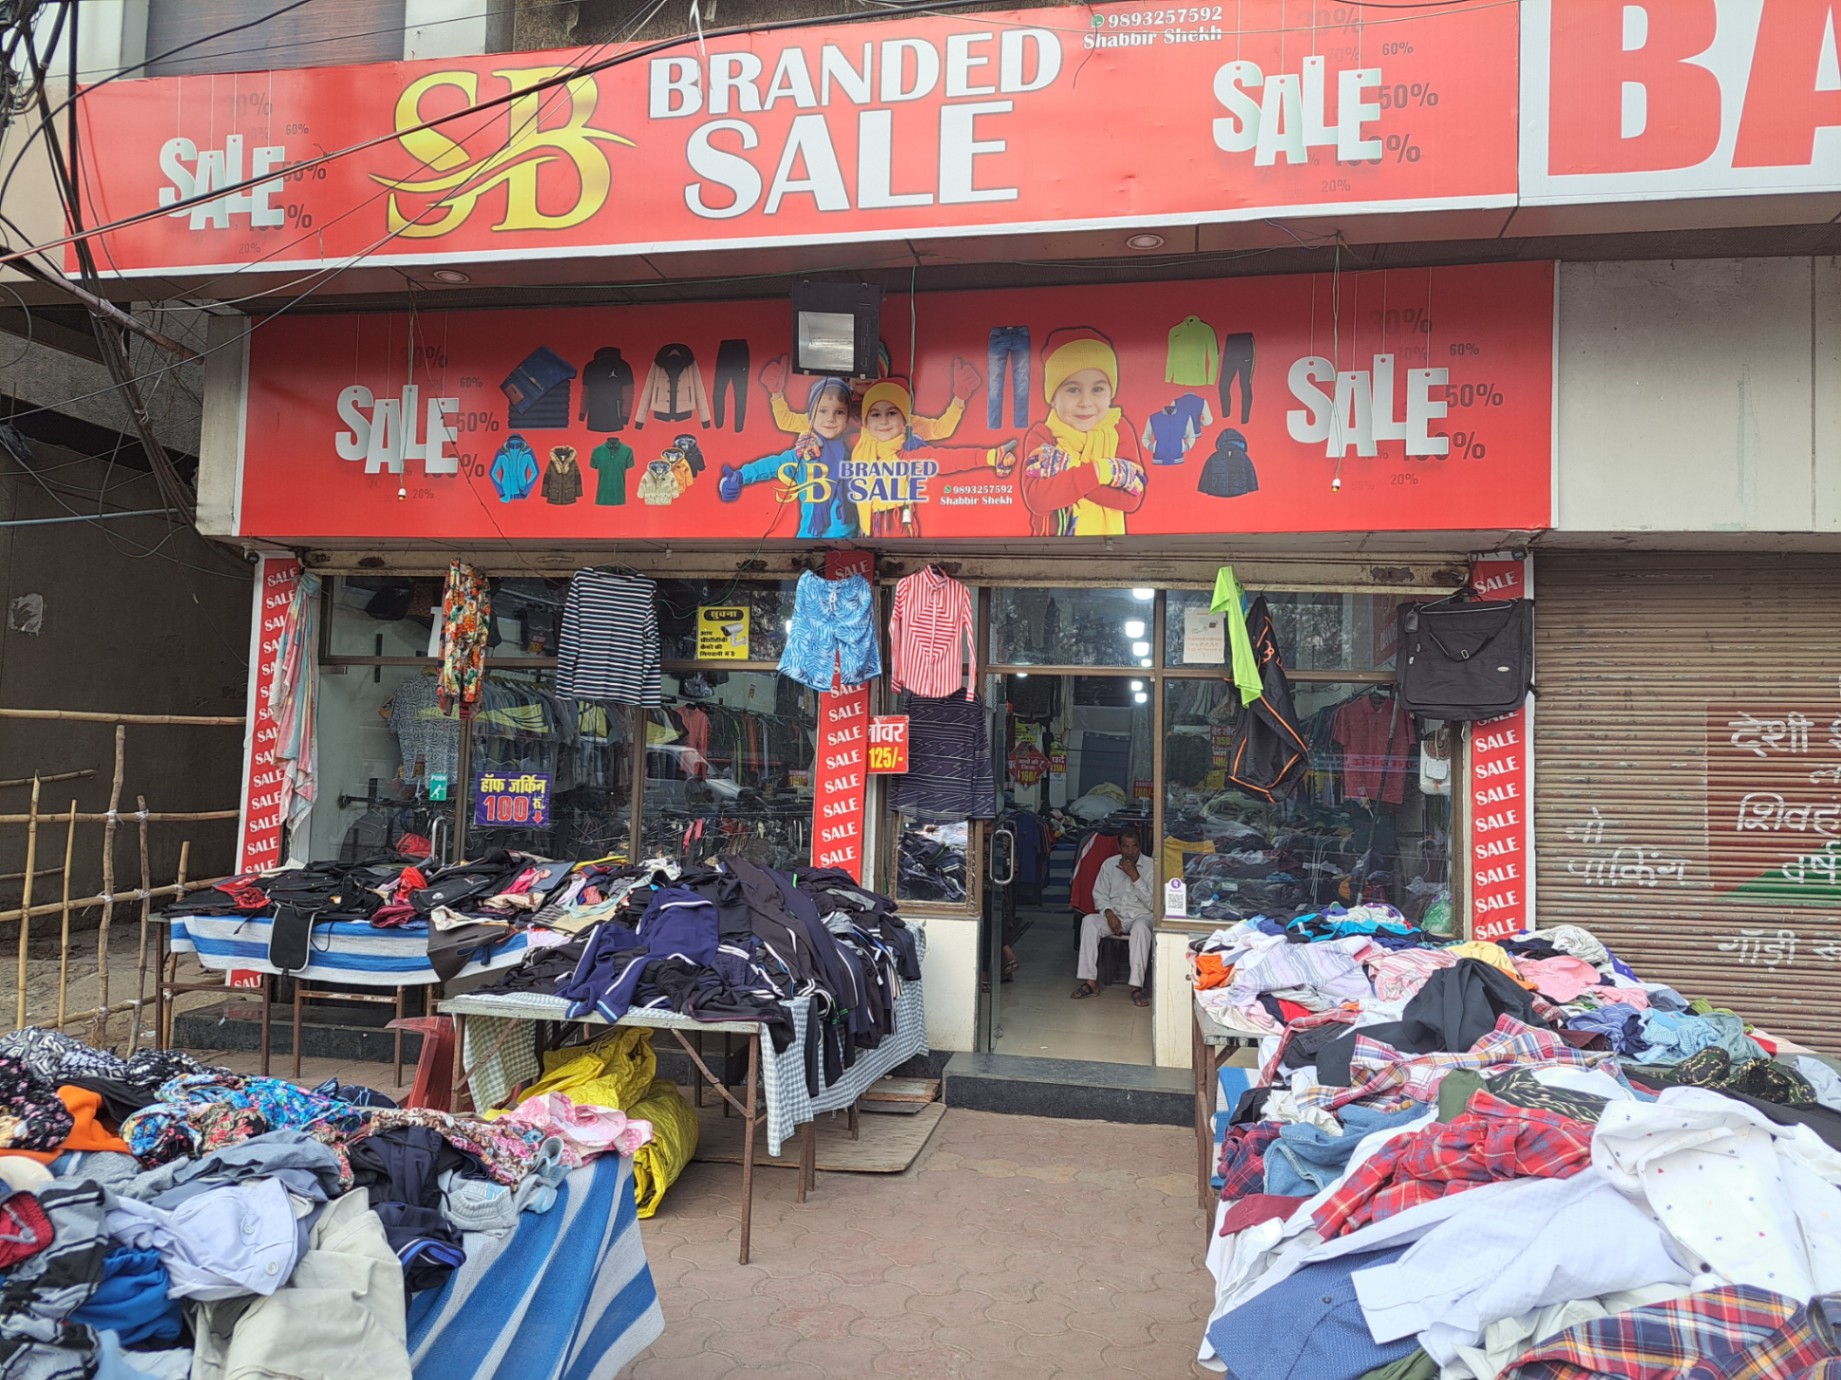 Upto 10% Off Deal @Branded Sale Hamidia Road, Bhopal